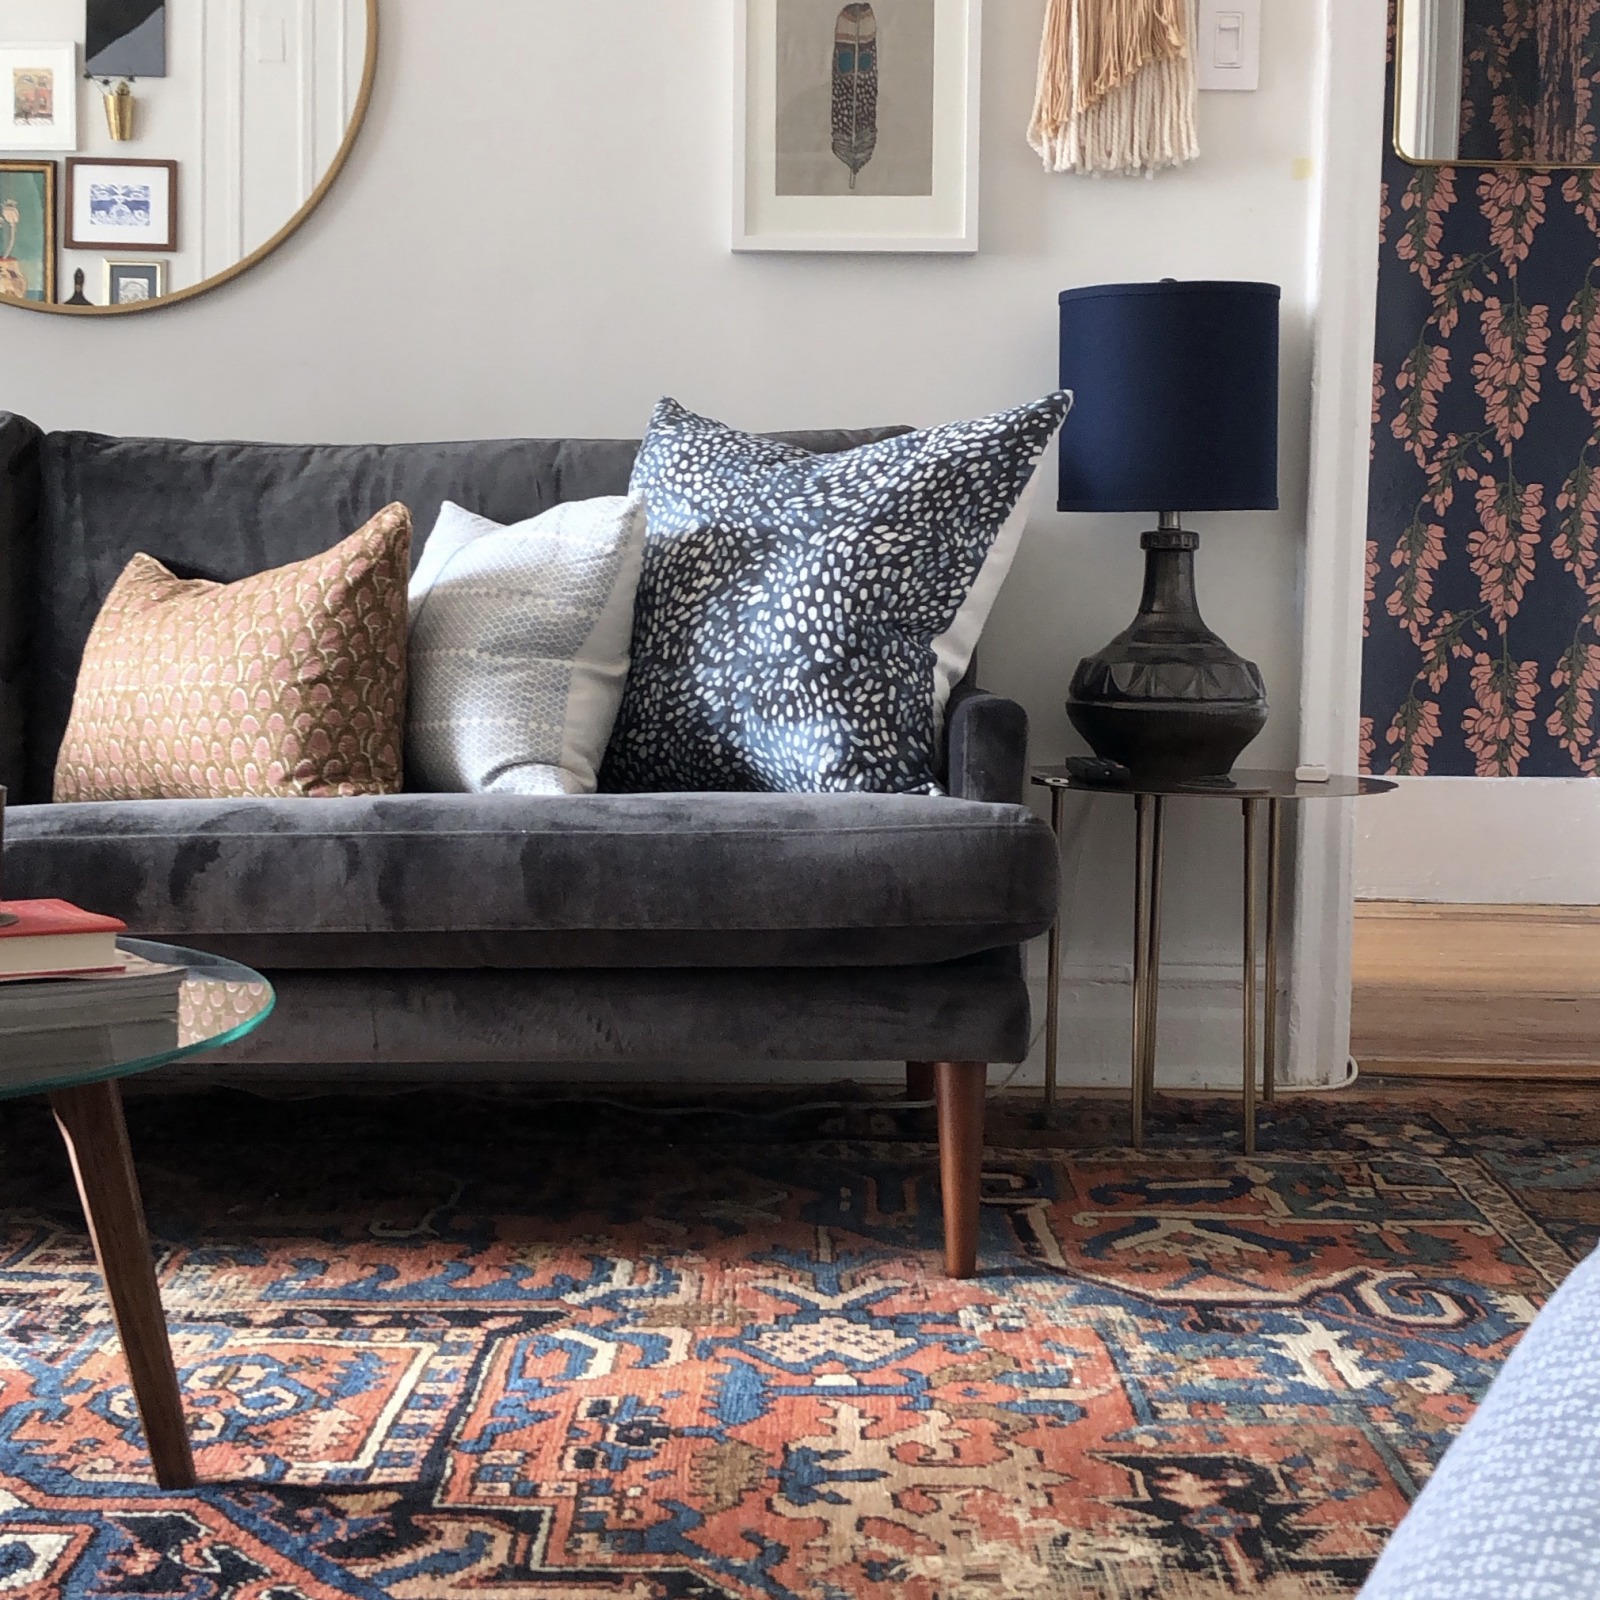 How To Choose The Right Rug For Your, How To Choose A Rug